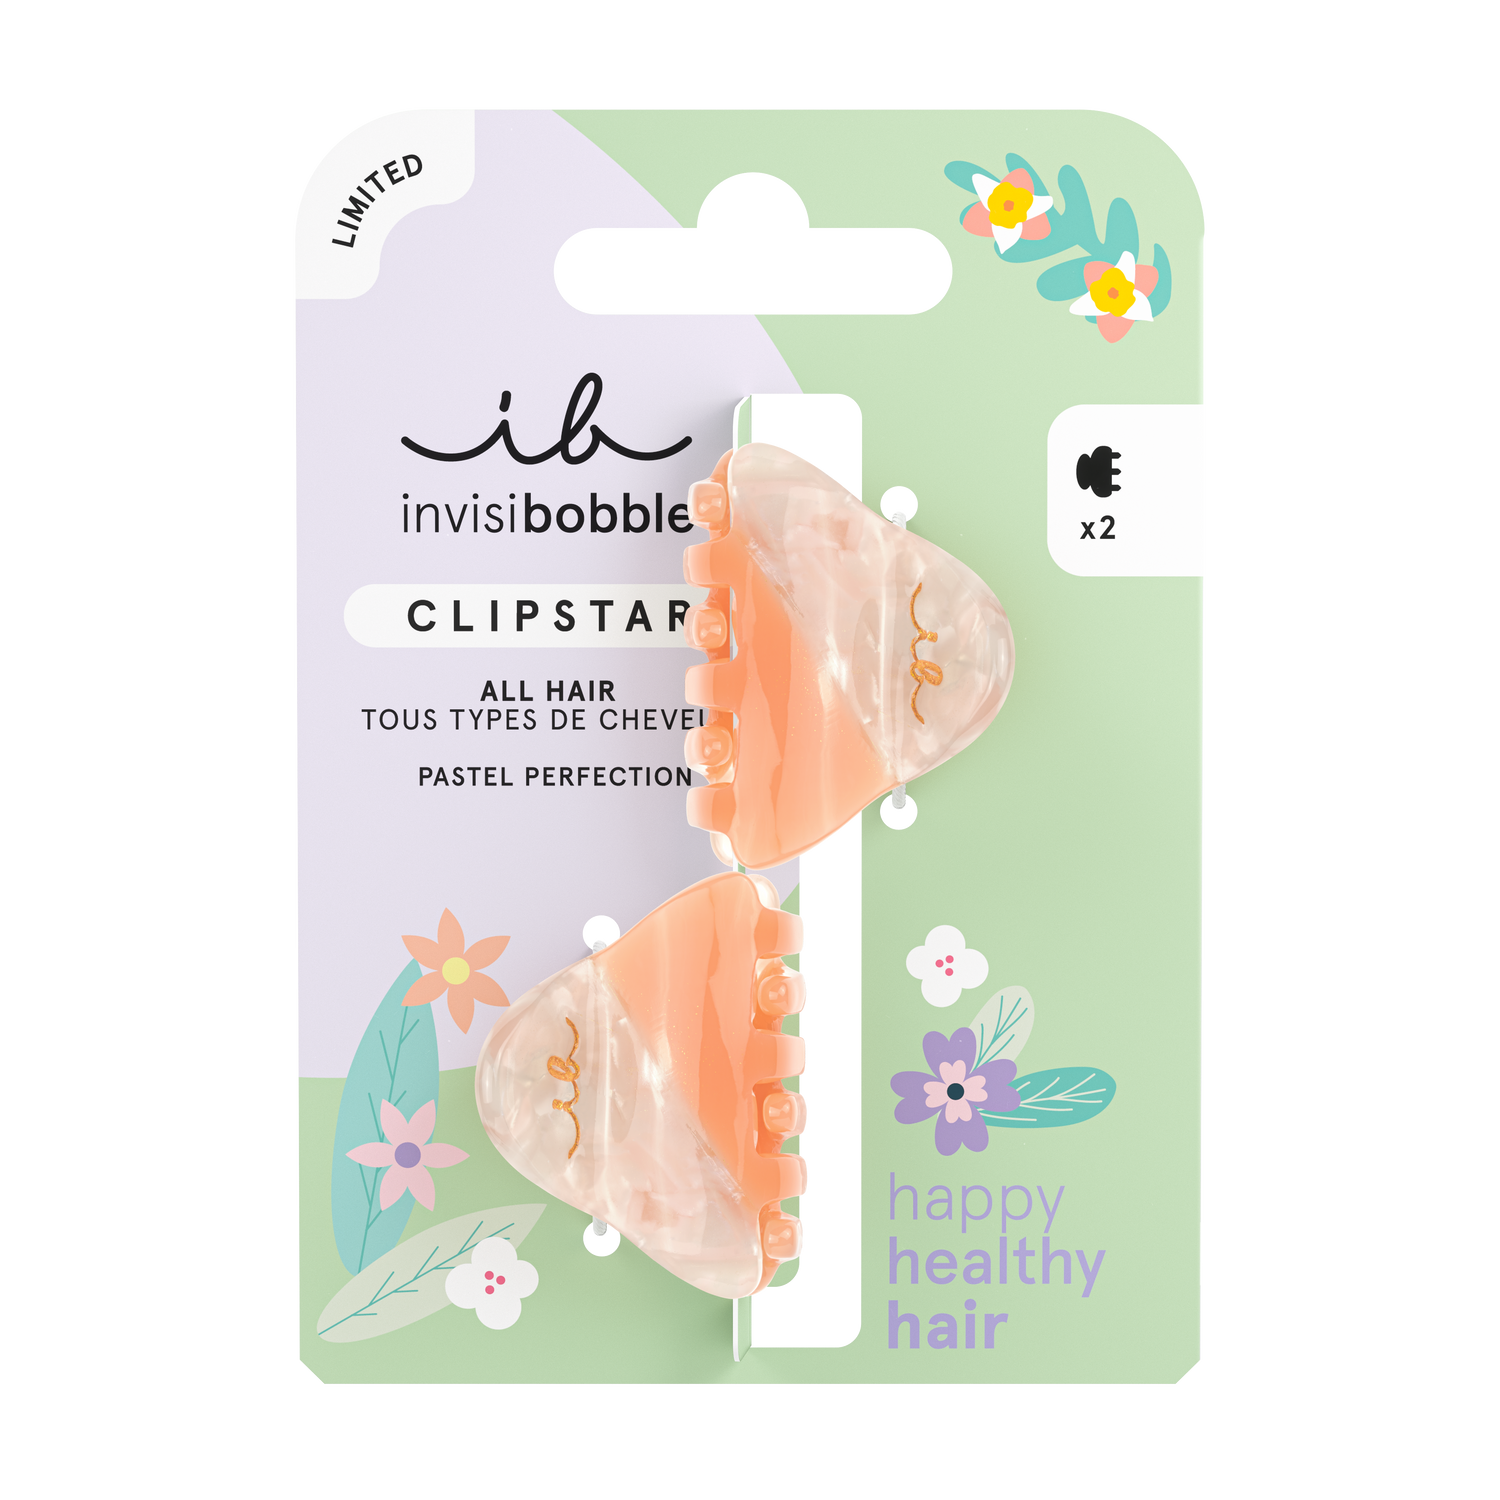 Limited Edition - Invisibobble Clipstar Easter Pastel Perfection 2pc